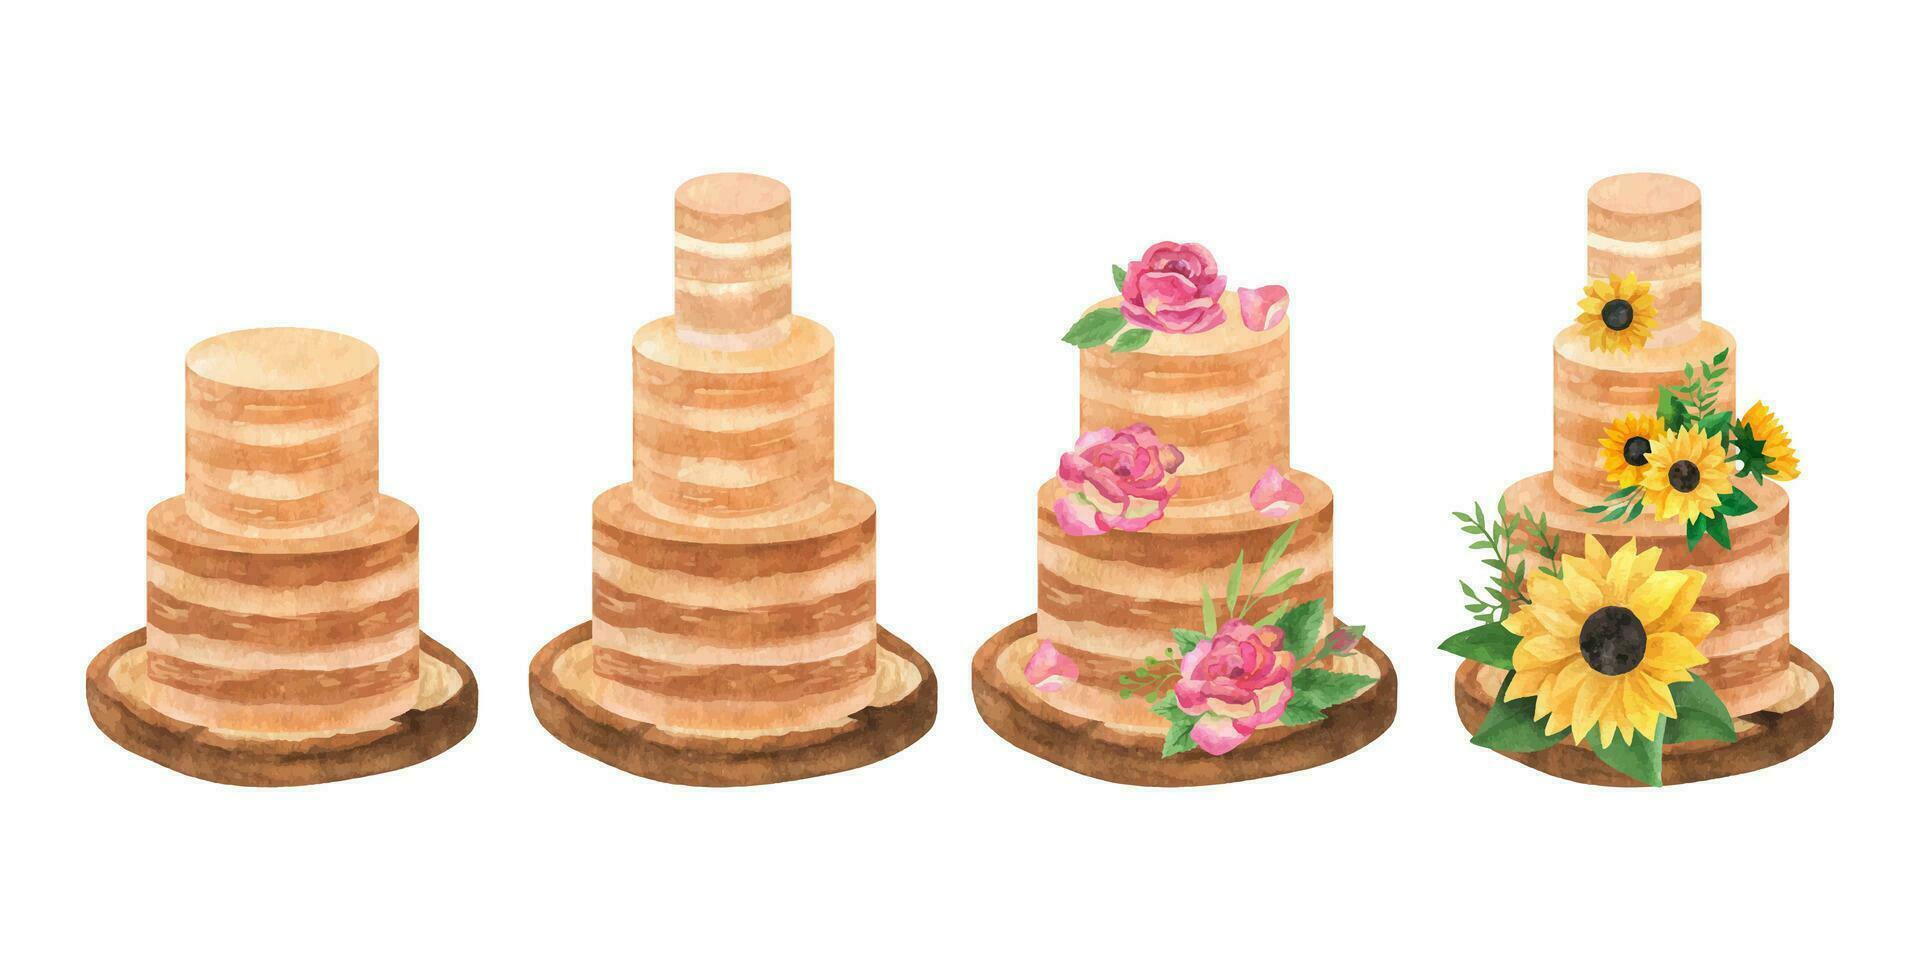 Boho watercolor layered cake with roses and sunflowers arrangements on wood slice, wedding romantic clipart vector